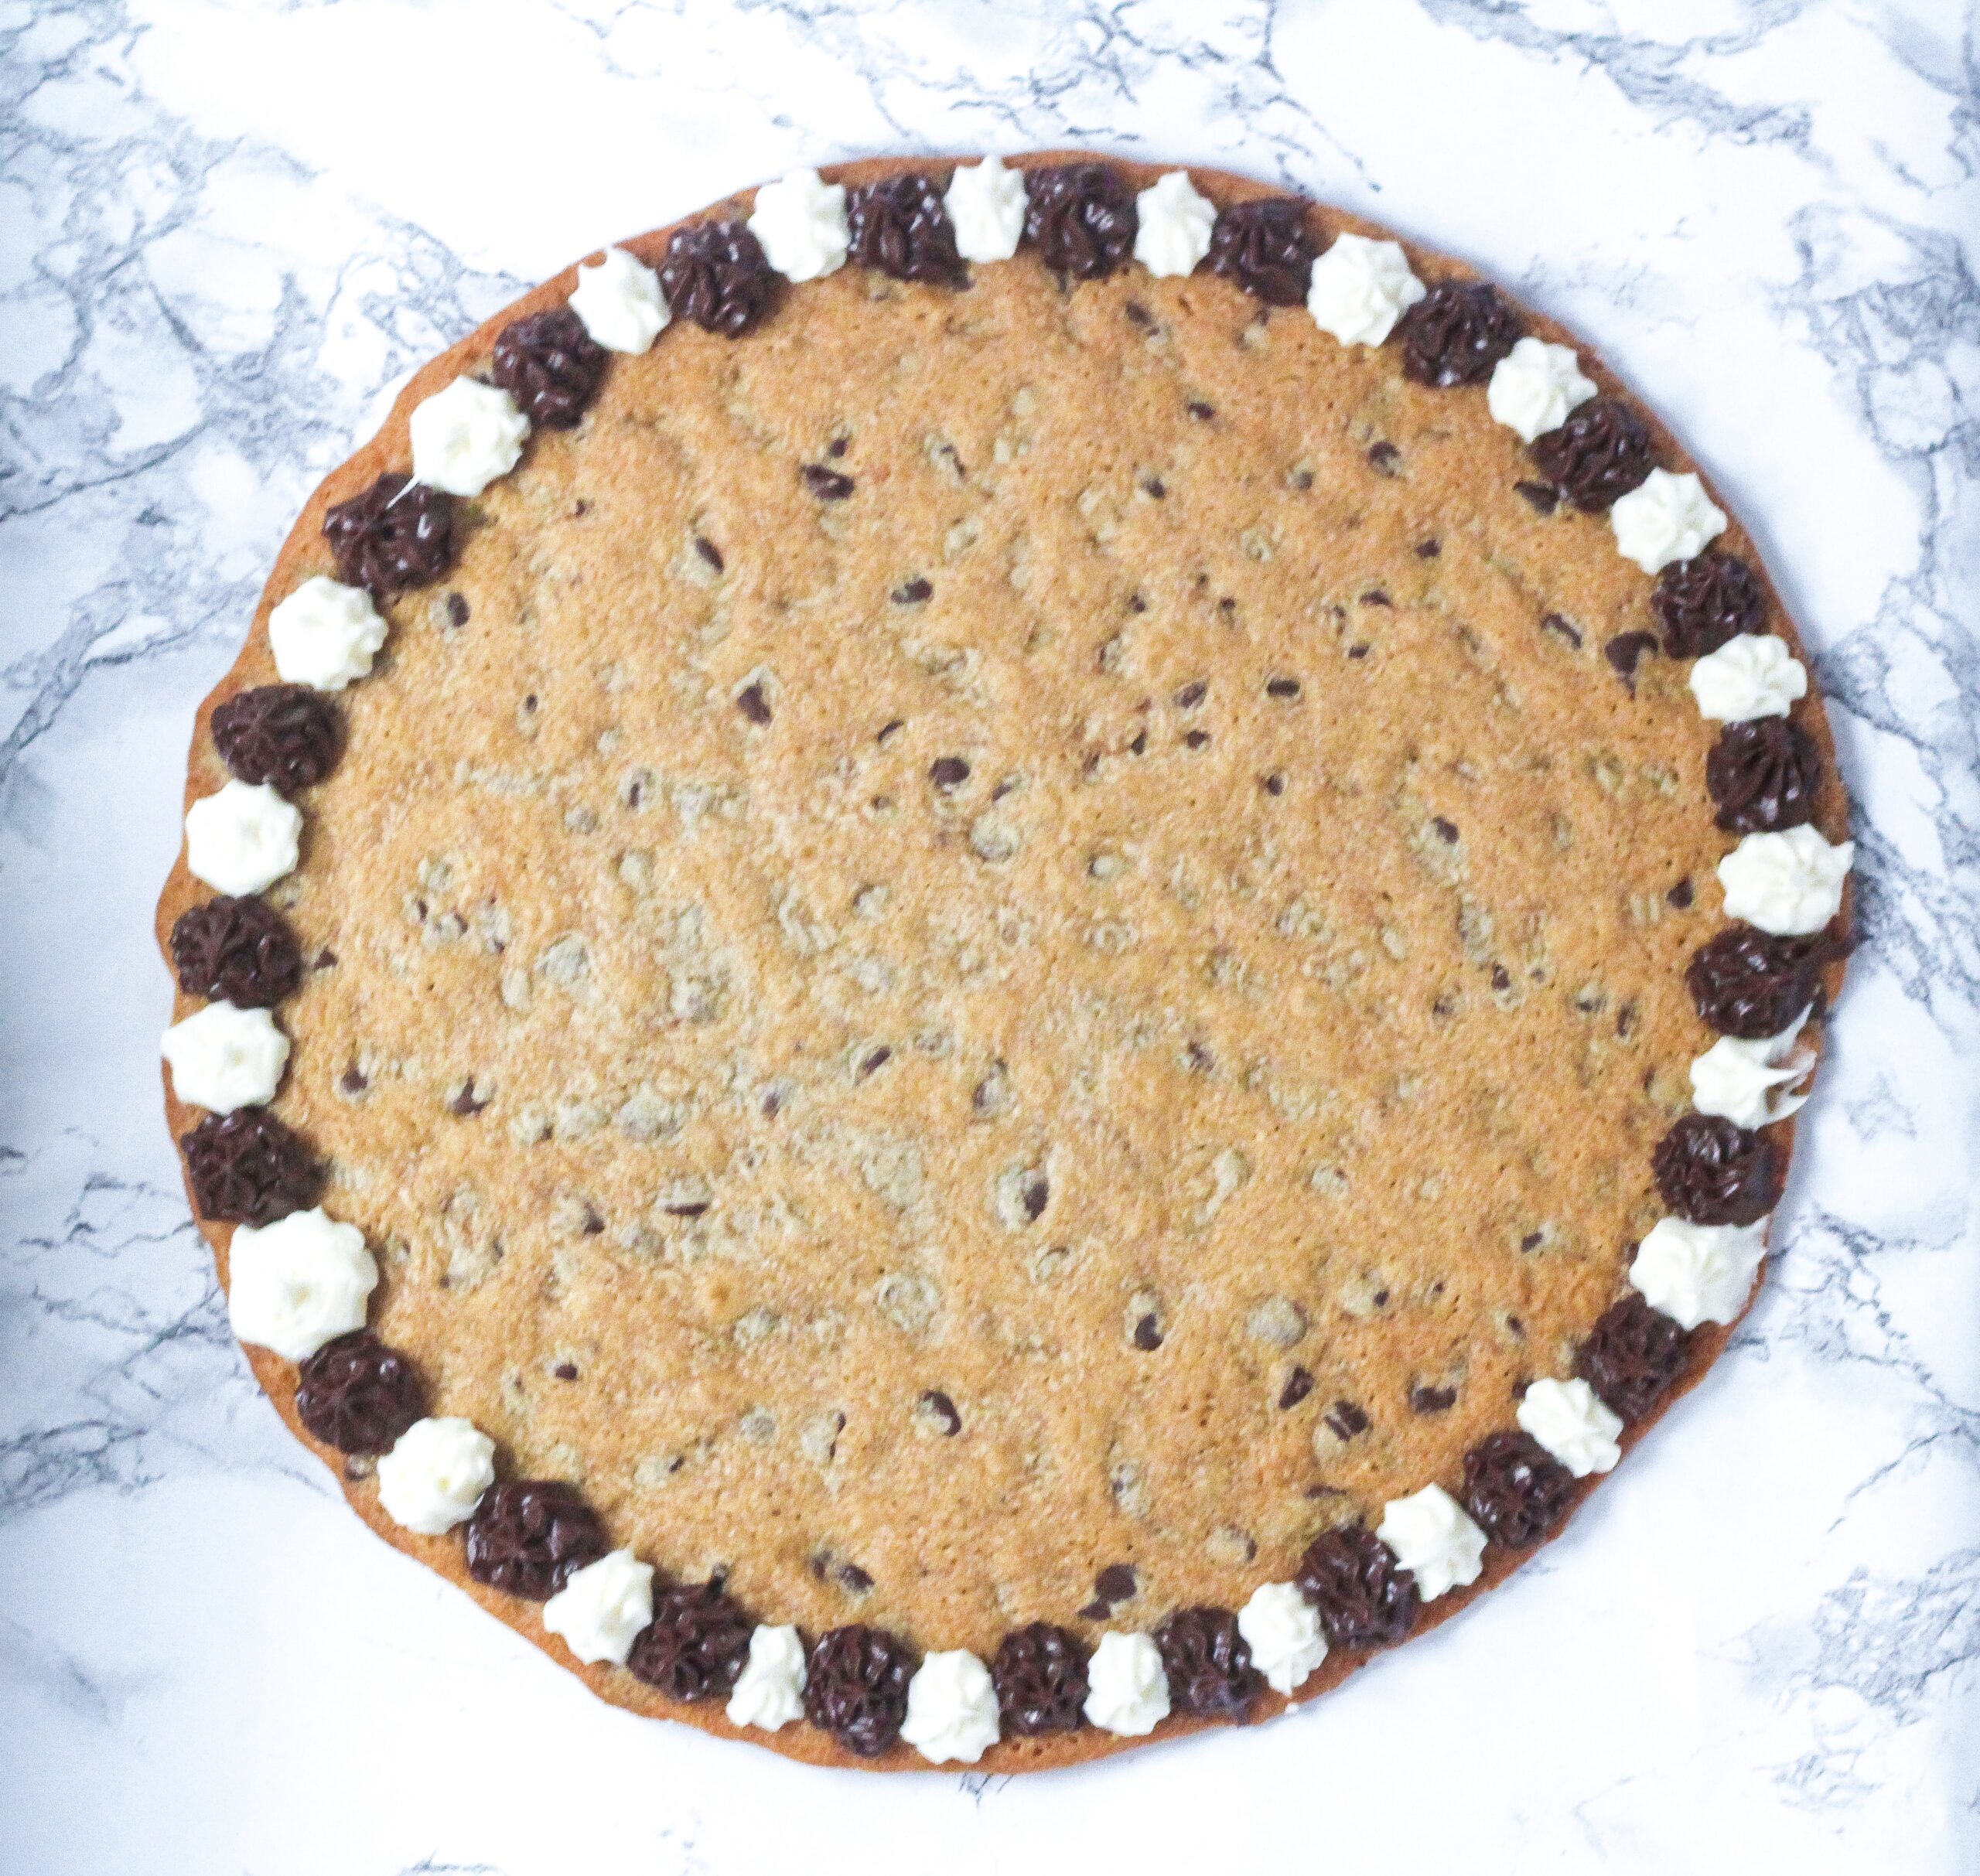 top down view of whole chocolate chip cookie cake with alternating brown and white frosting dots around the edge, on top of a marbled surface